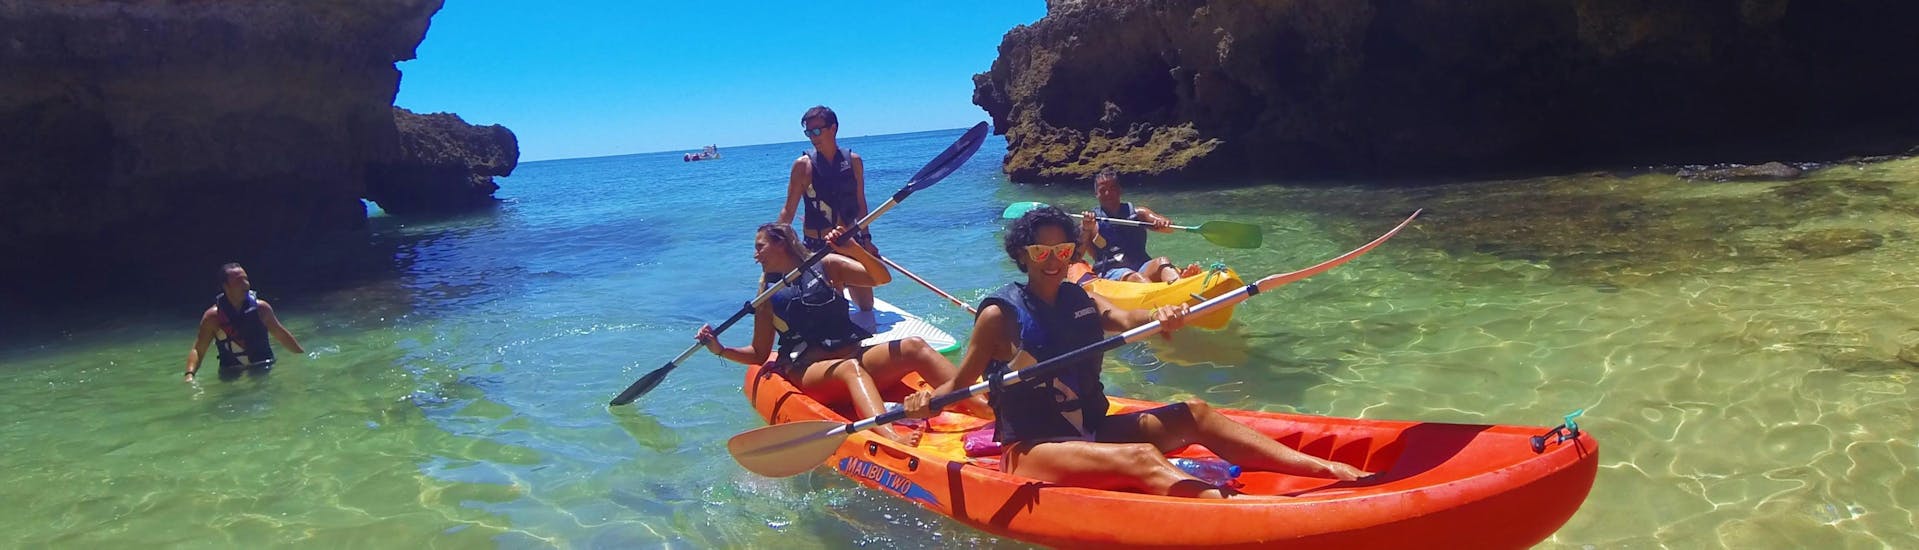 While Sea Kayaking to Caves and Wild Beaches from Armação de Pêra, the participants of the tour follow their local guide from Moments Watersports Algarve to hidden treasures along the coast.